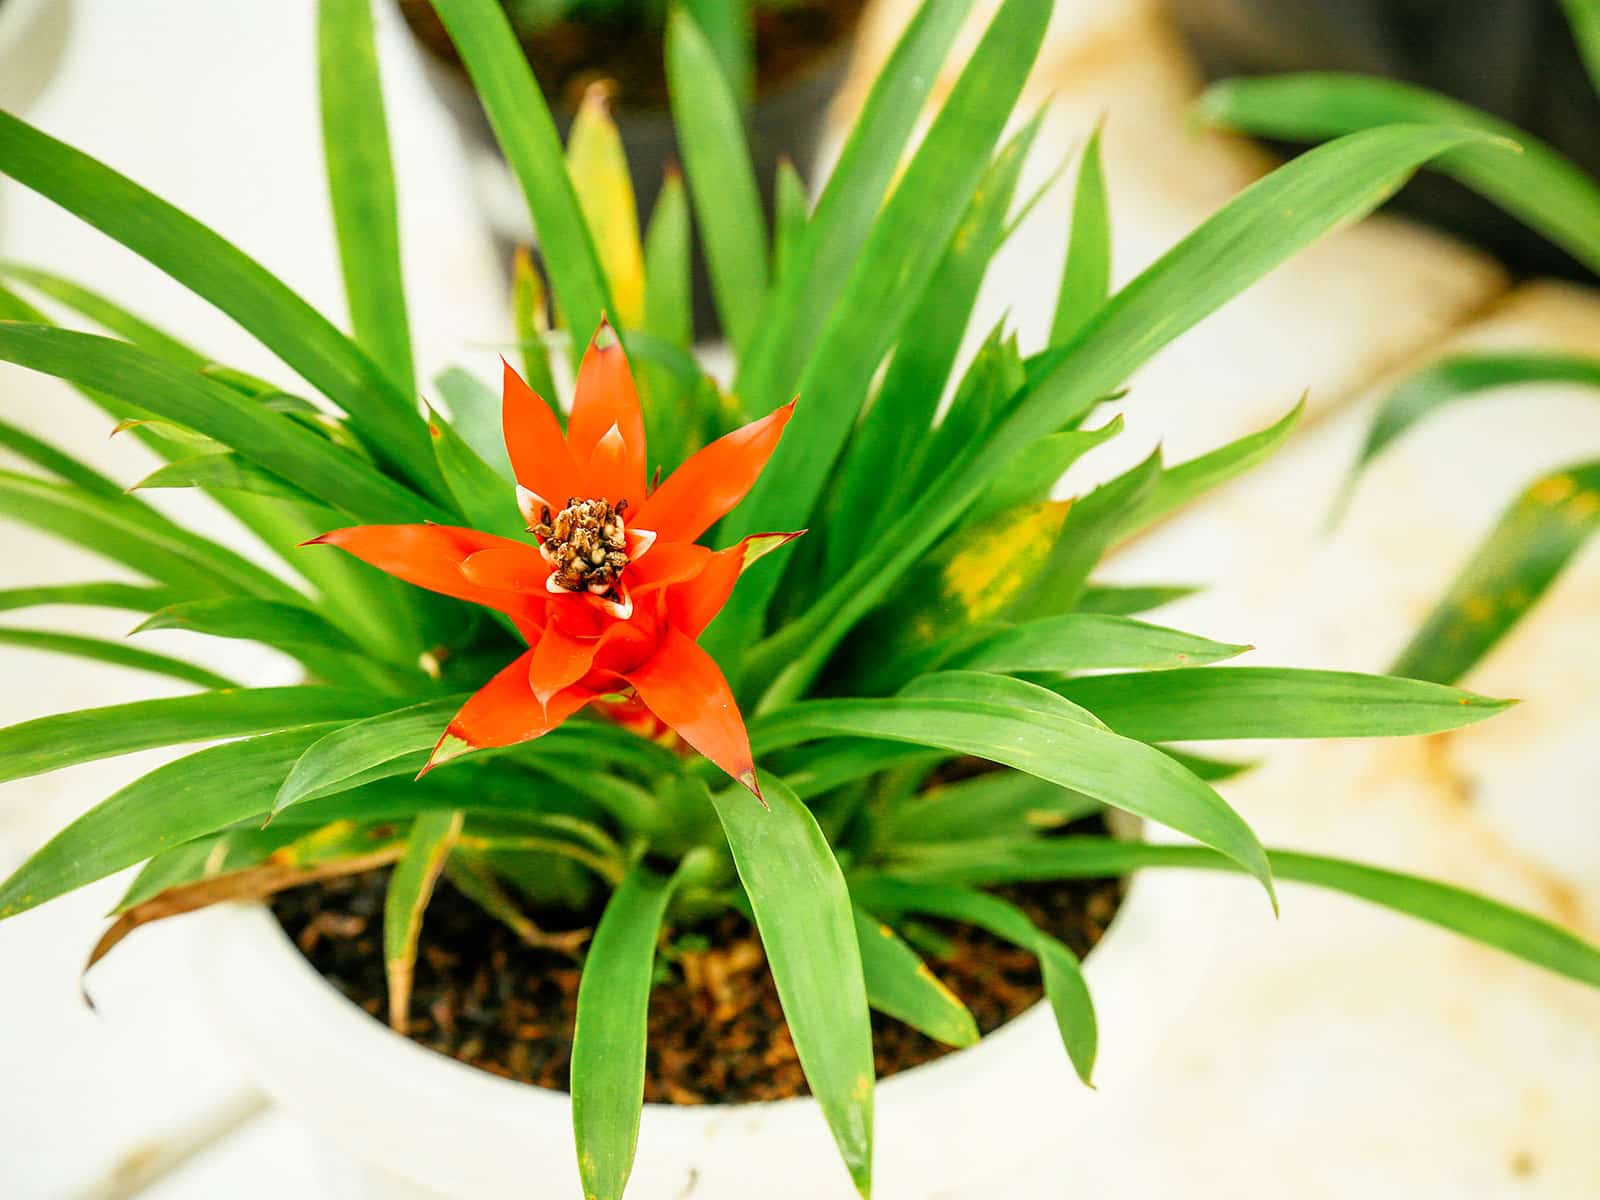 A small Guzmania bromeliad houseplant in a white pot, with a scarlet flower in bloom